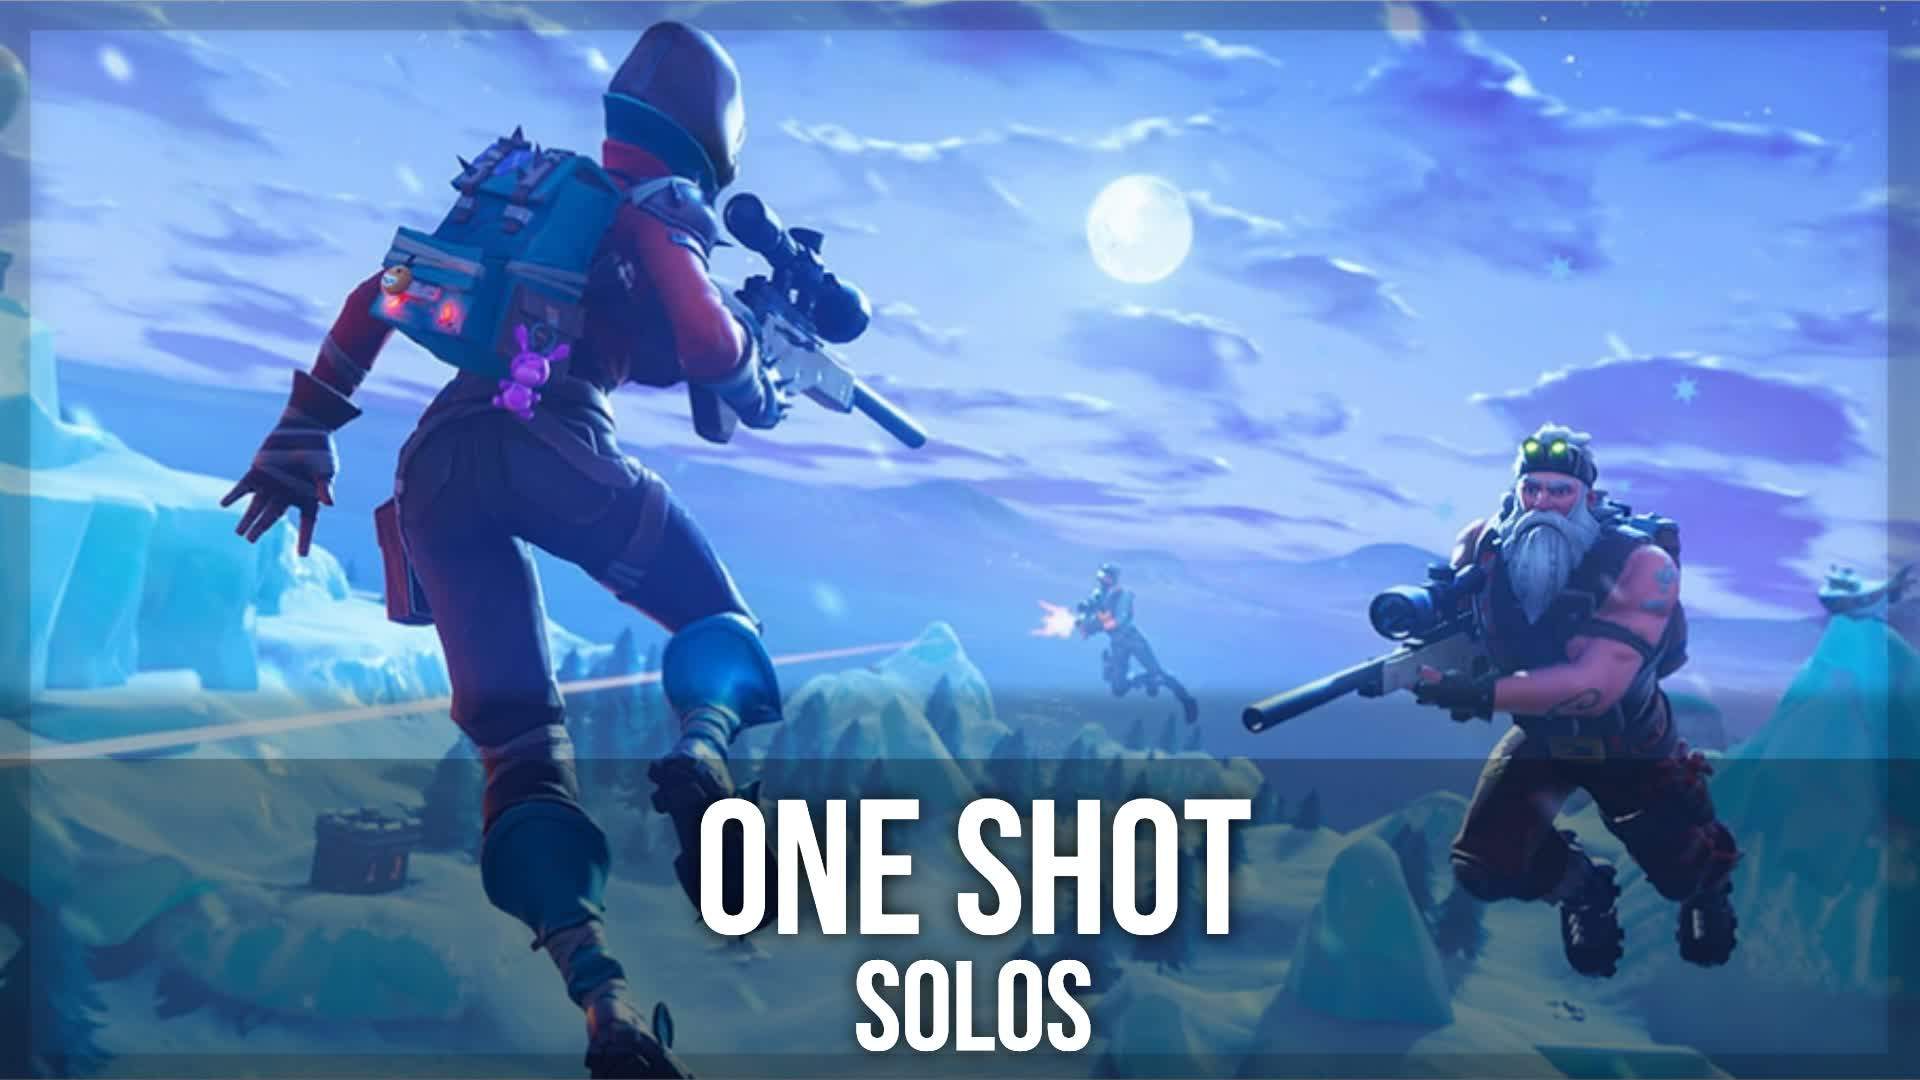 One Shot Solos